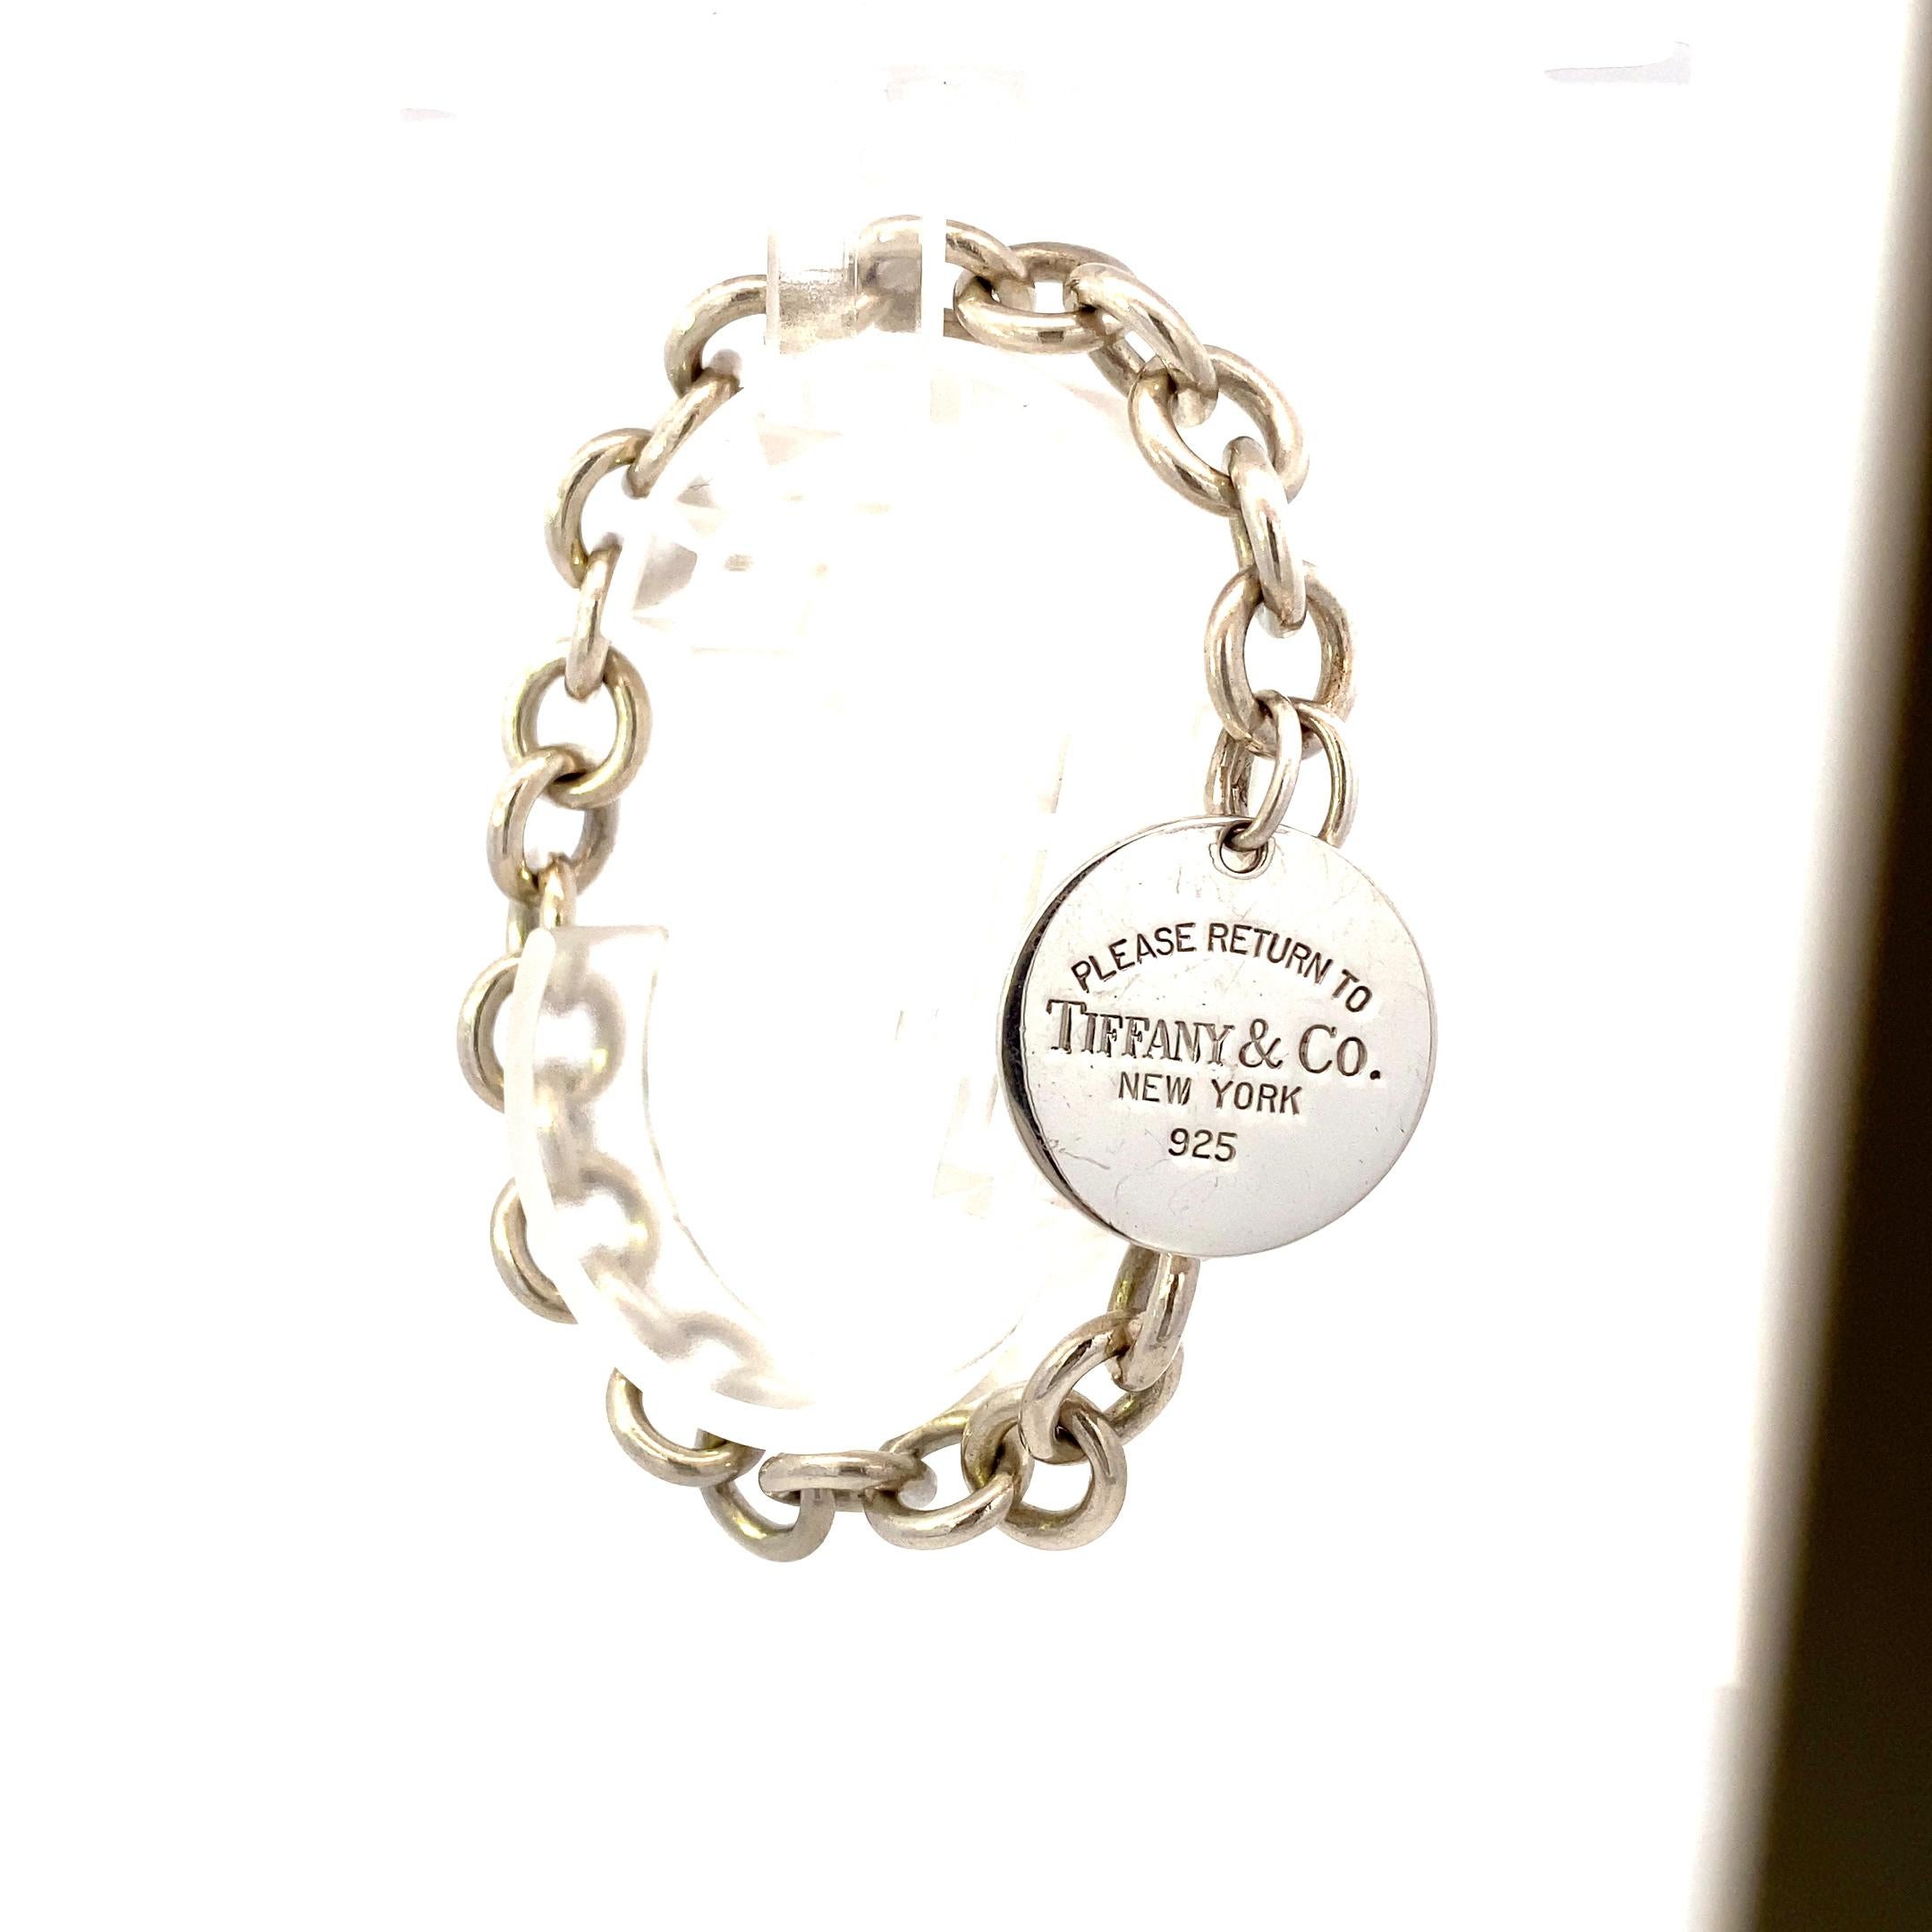 Tiffany & Co Return to Tiffany Sterling Silver Link Bracelet with Round Pendant. 7 inches. 22.3Dwt